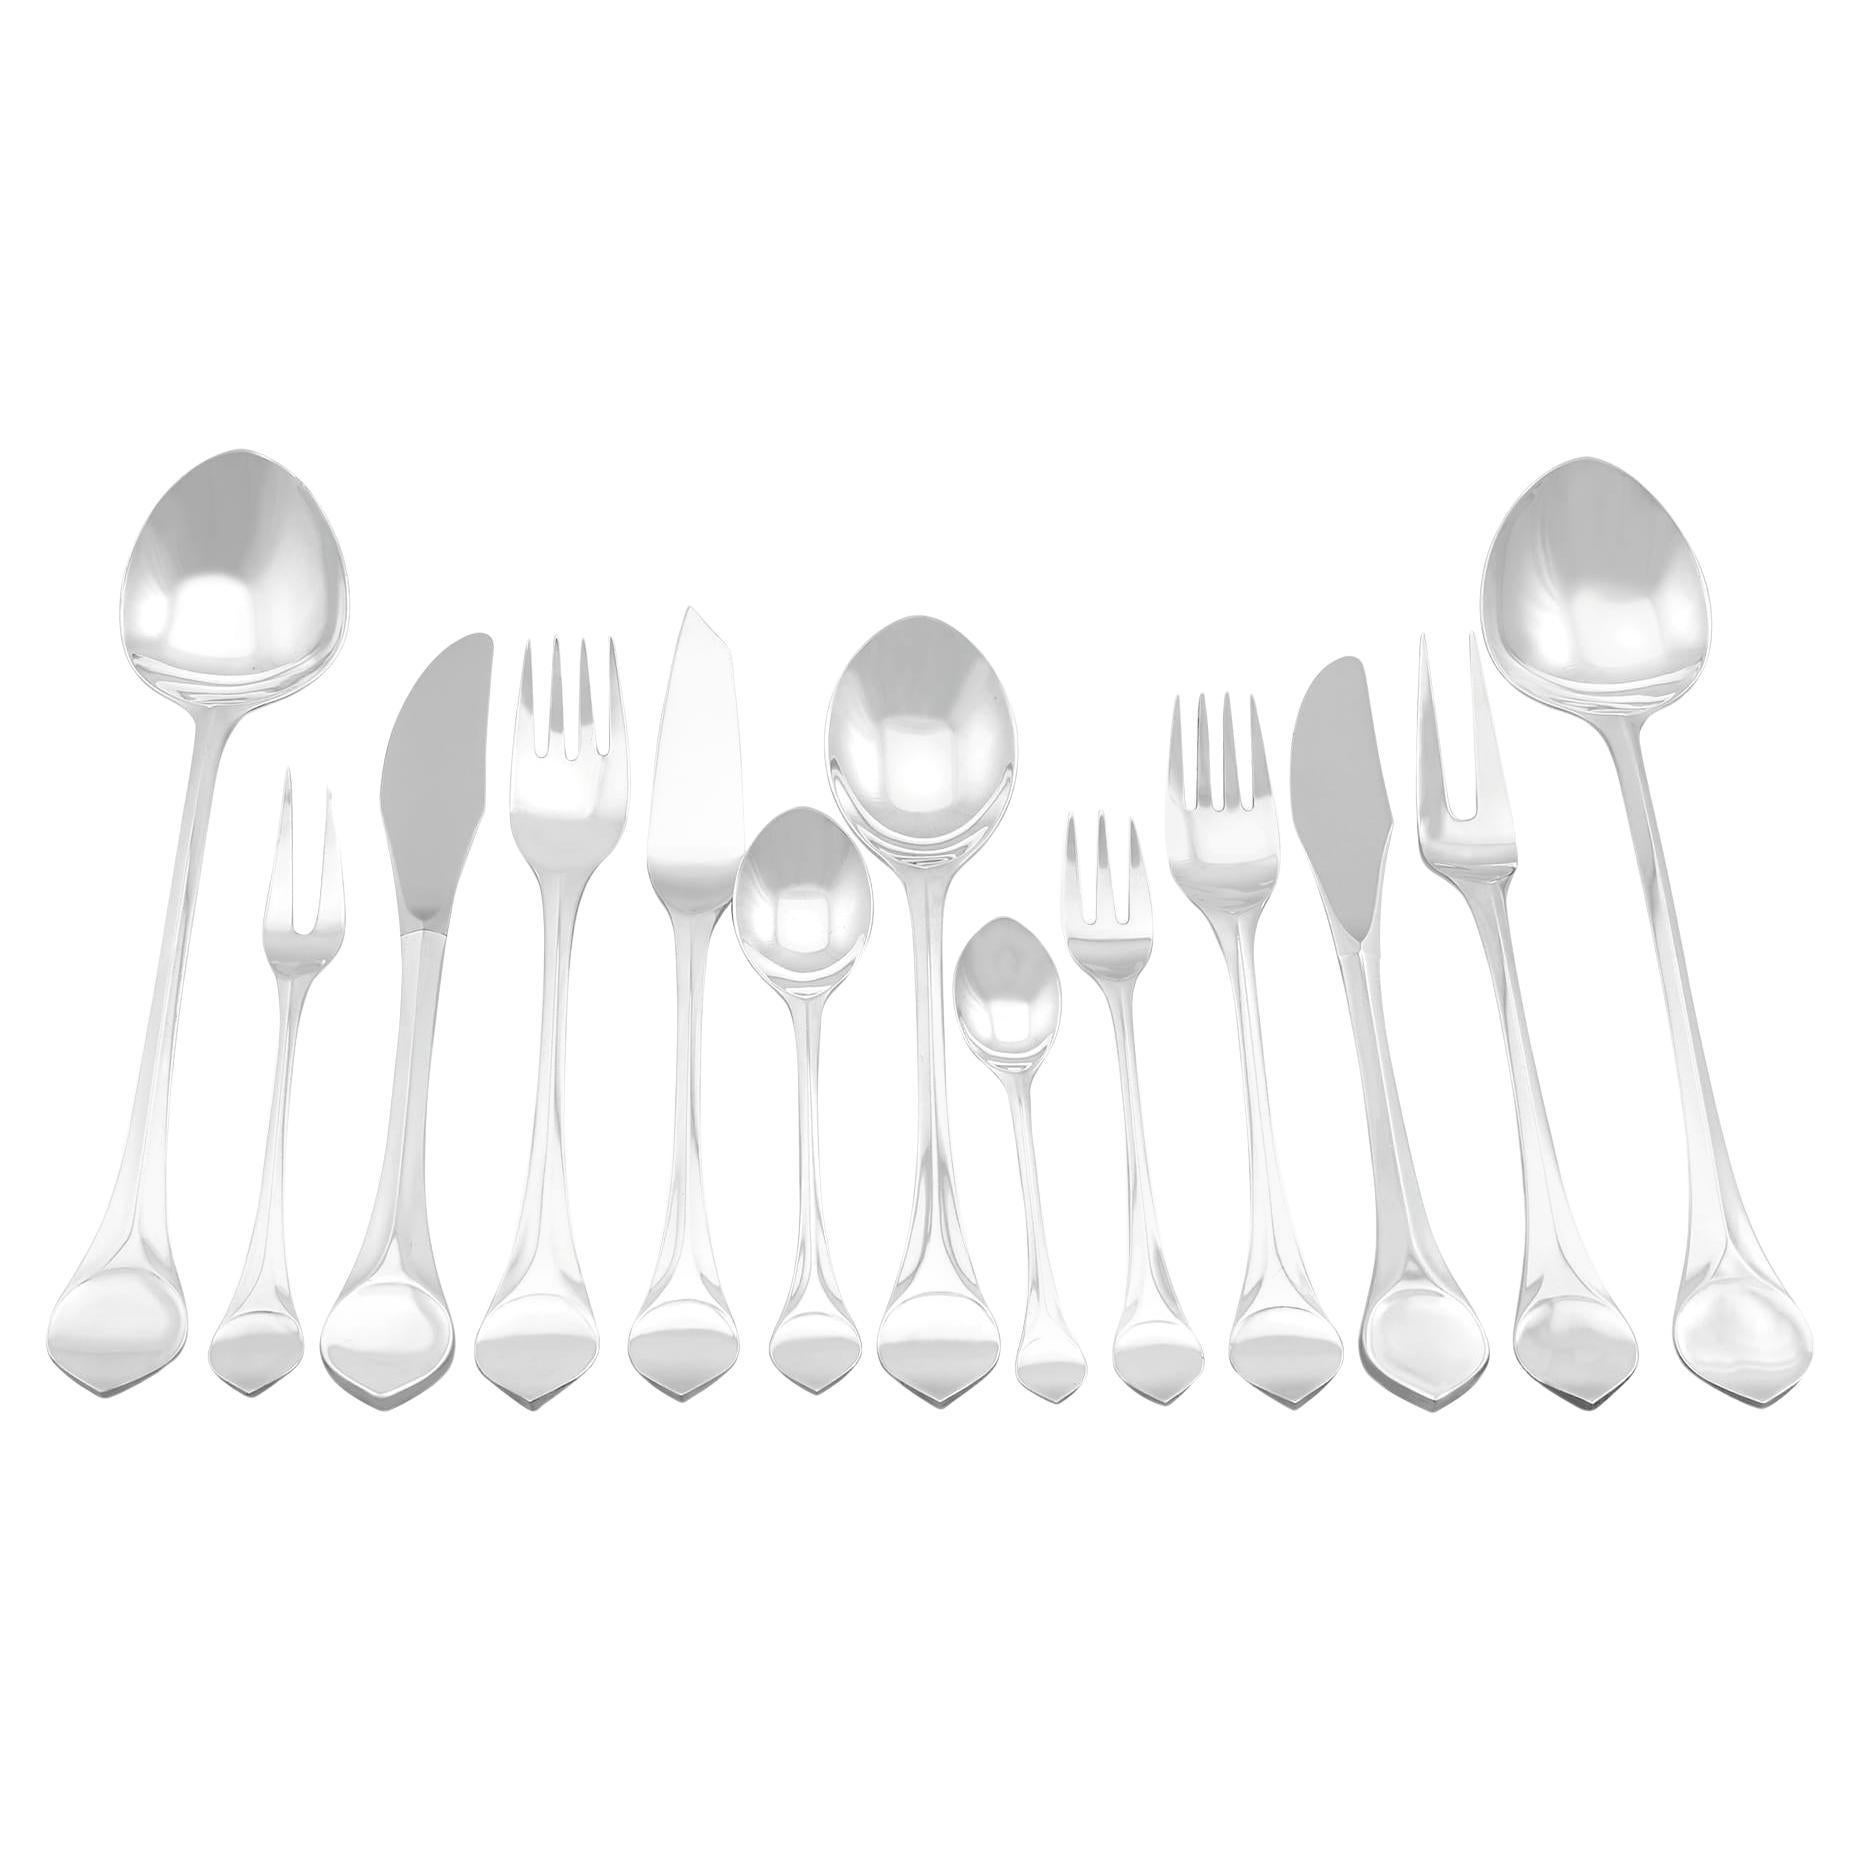 What is the best quality stainless flatware?